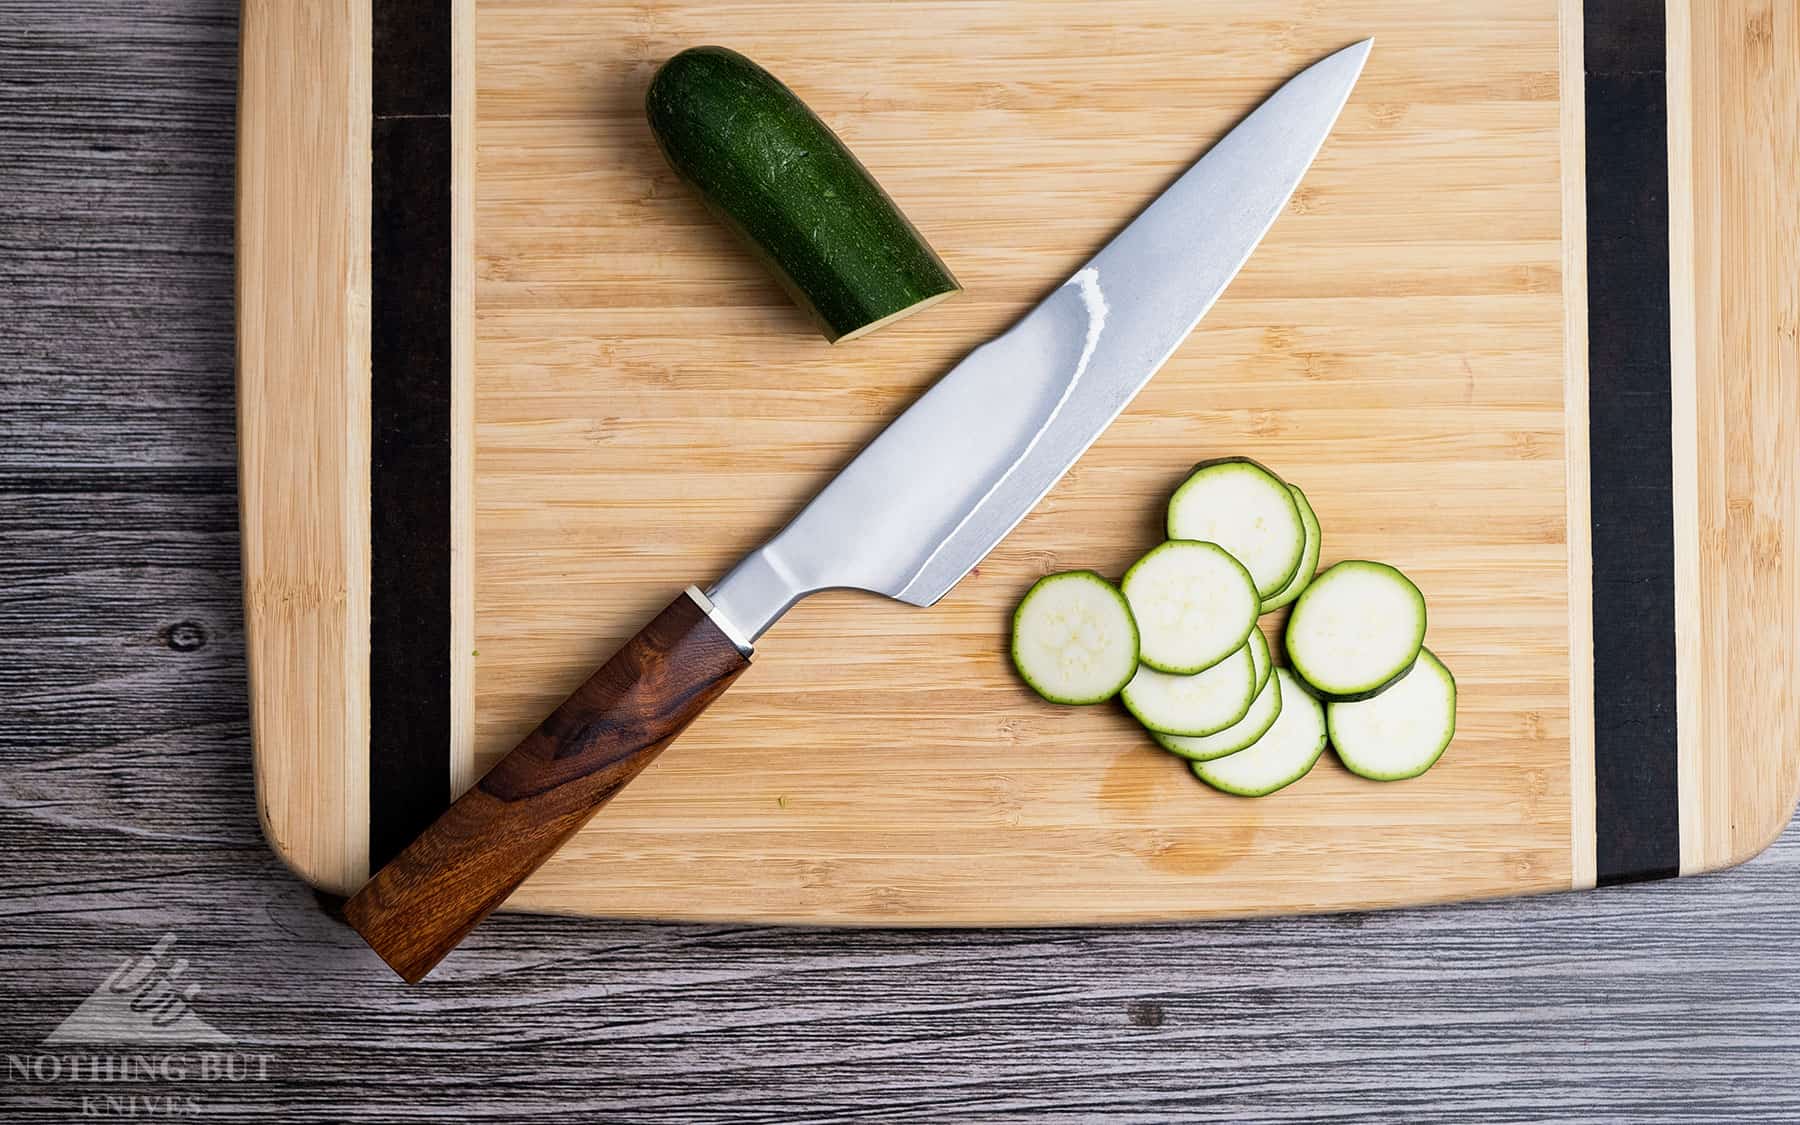 The Xin Cutlery XinCraft 8.4 inch chef knife handled zucchini slices quite well.